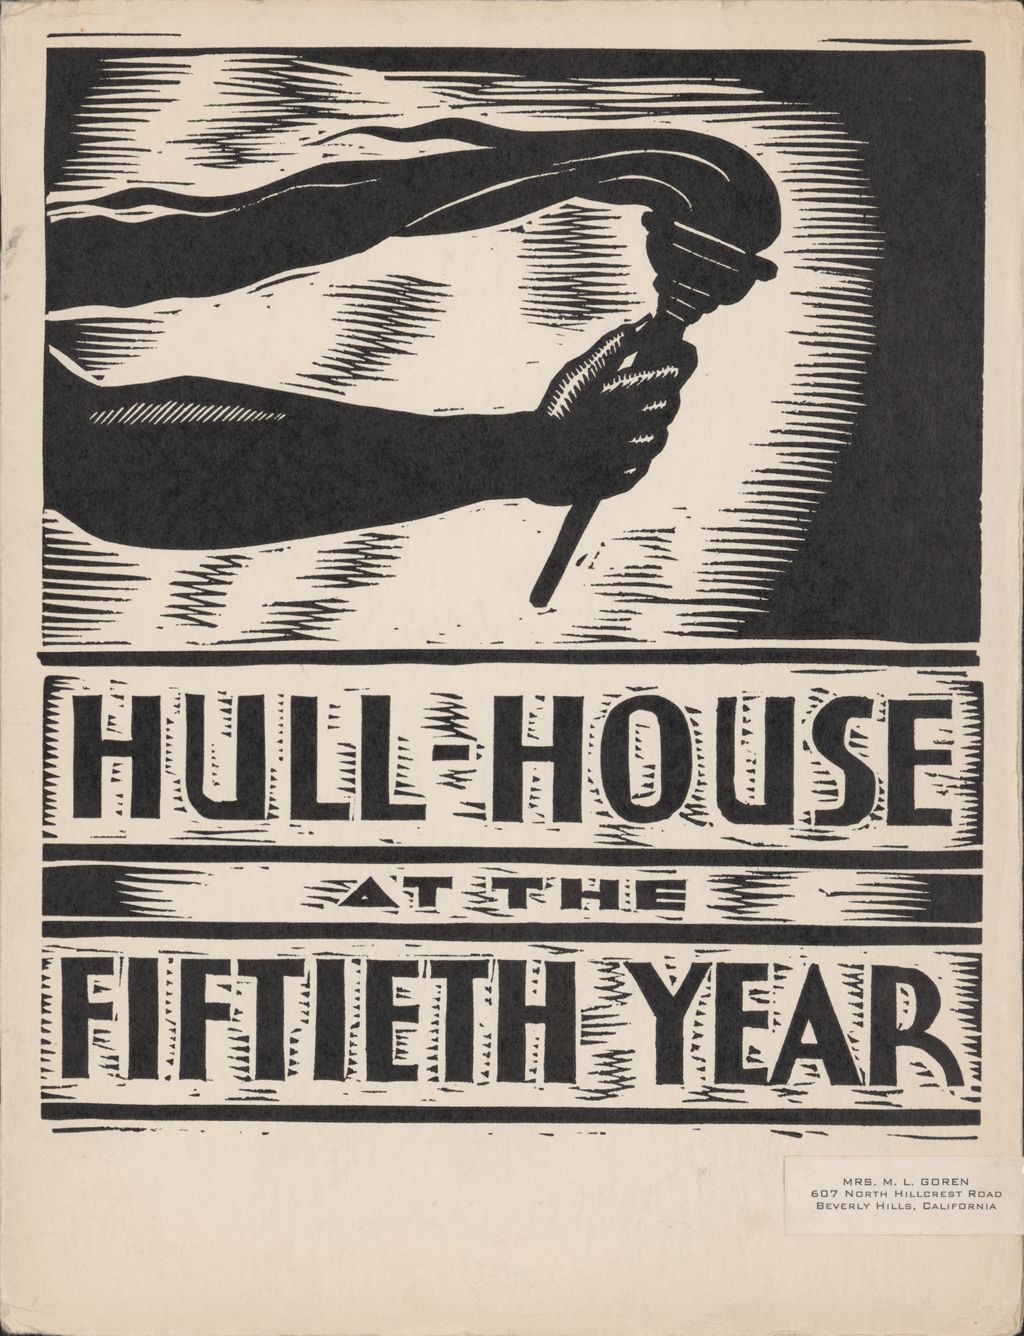 Miniature of Hull-House Year Book, 1940